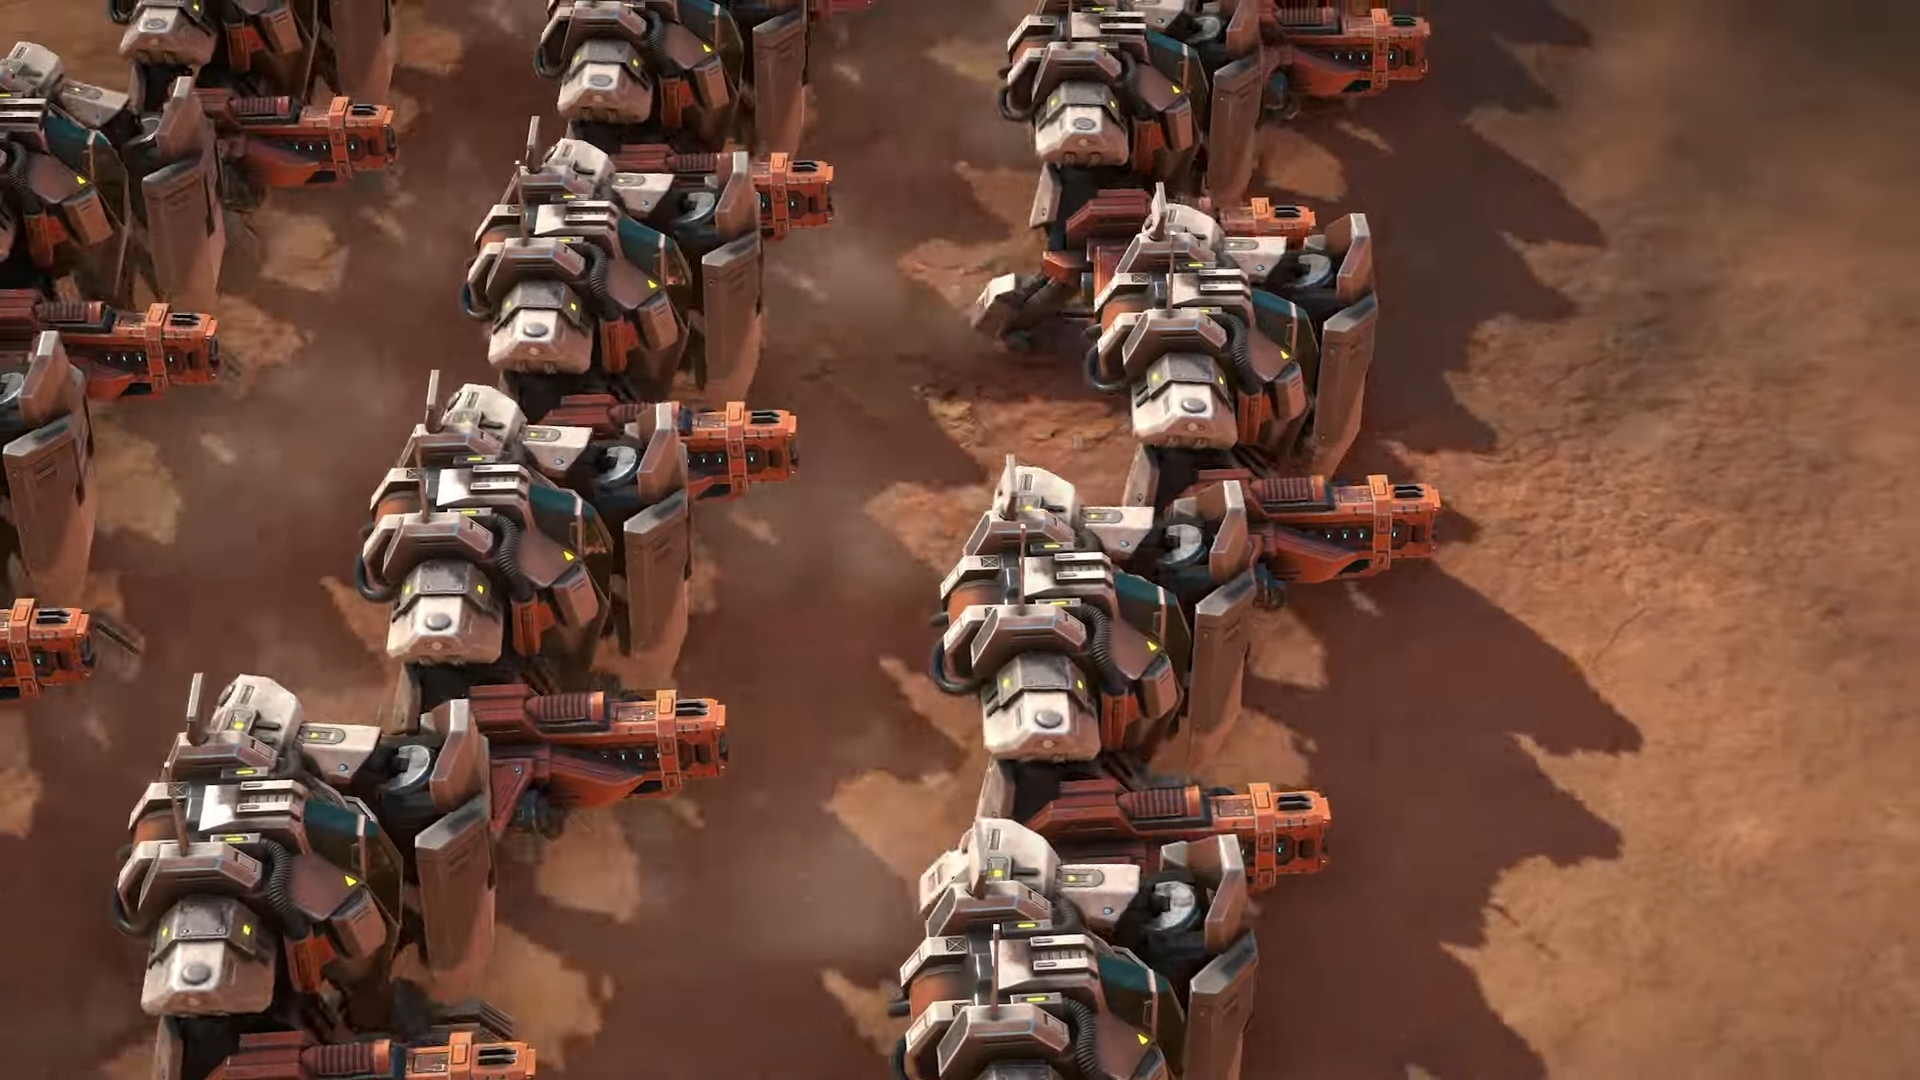 Smaller mech soldiers form up in ranks